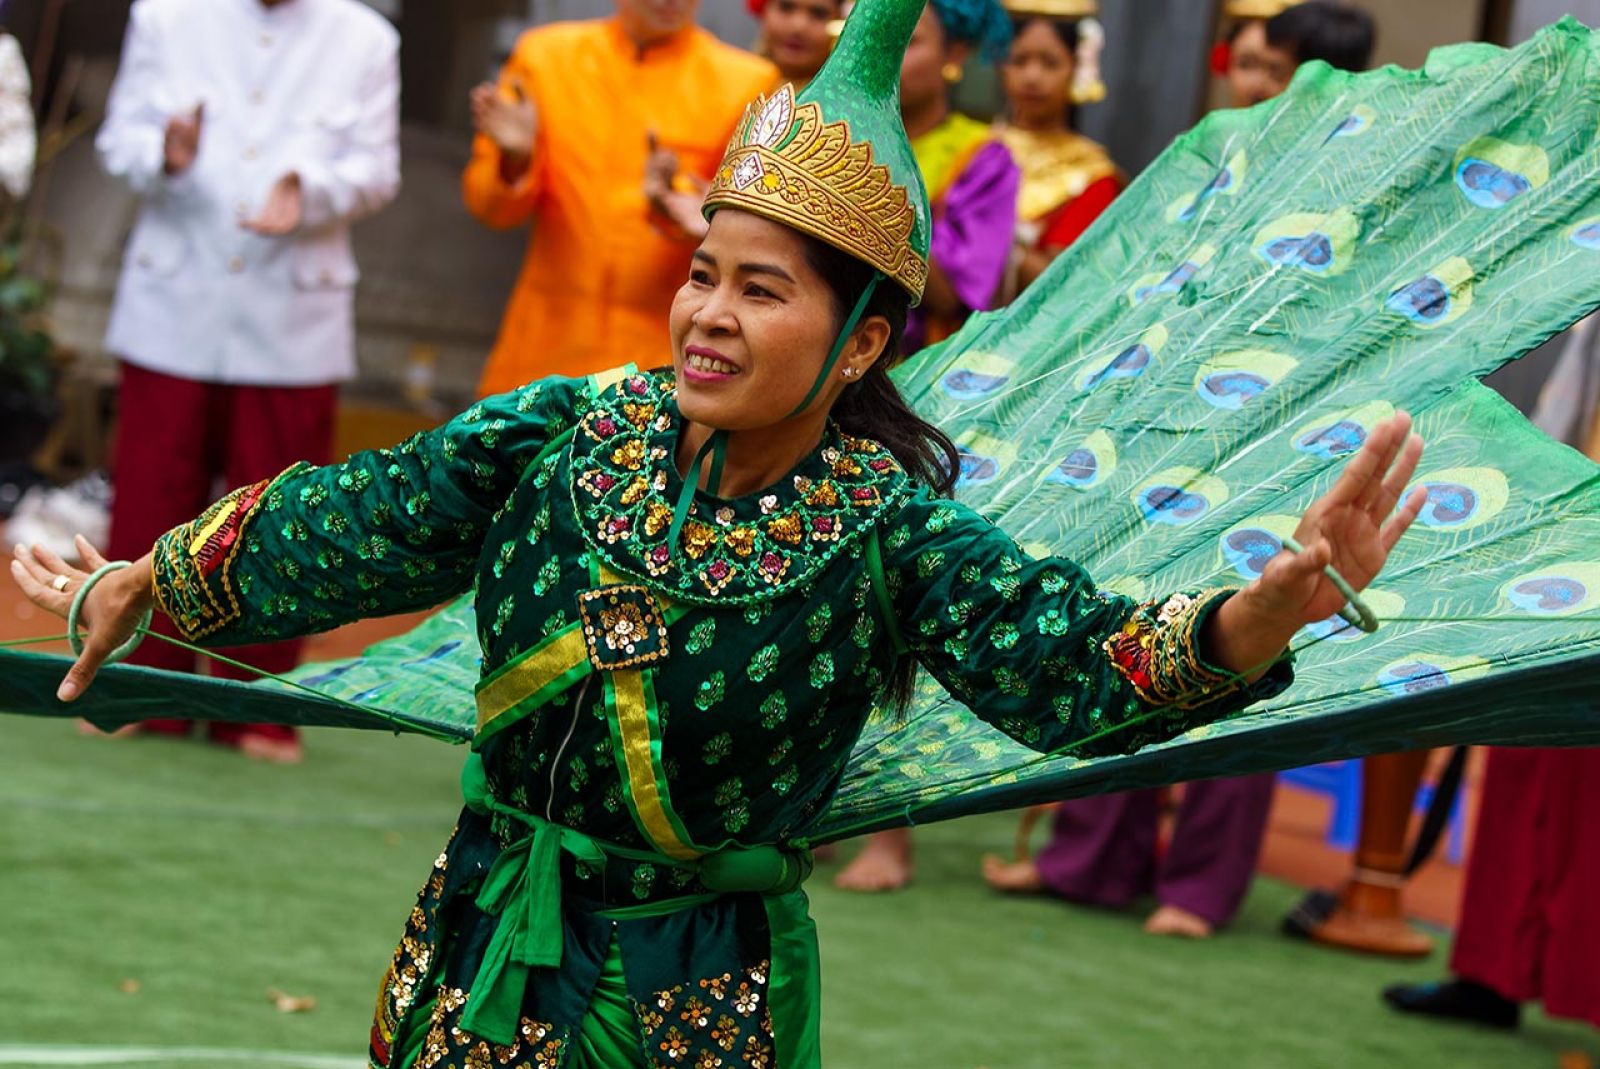 A woman dancing in her cultural costume